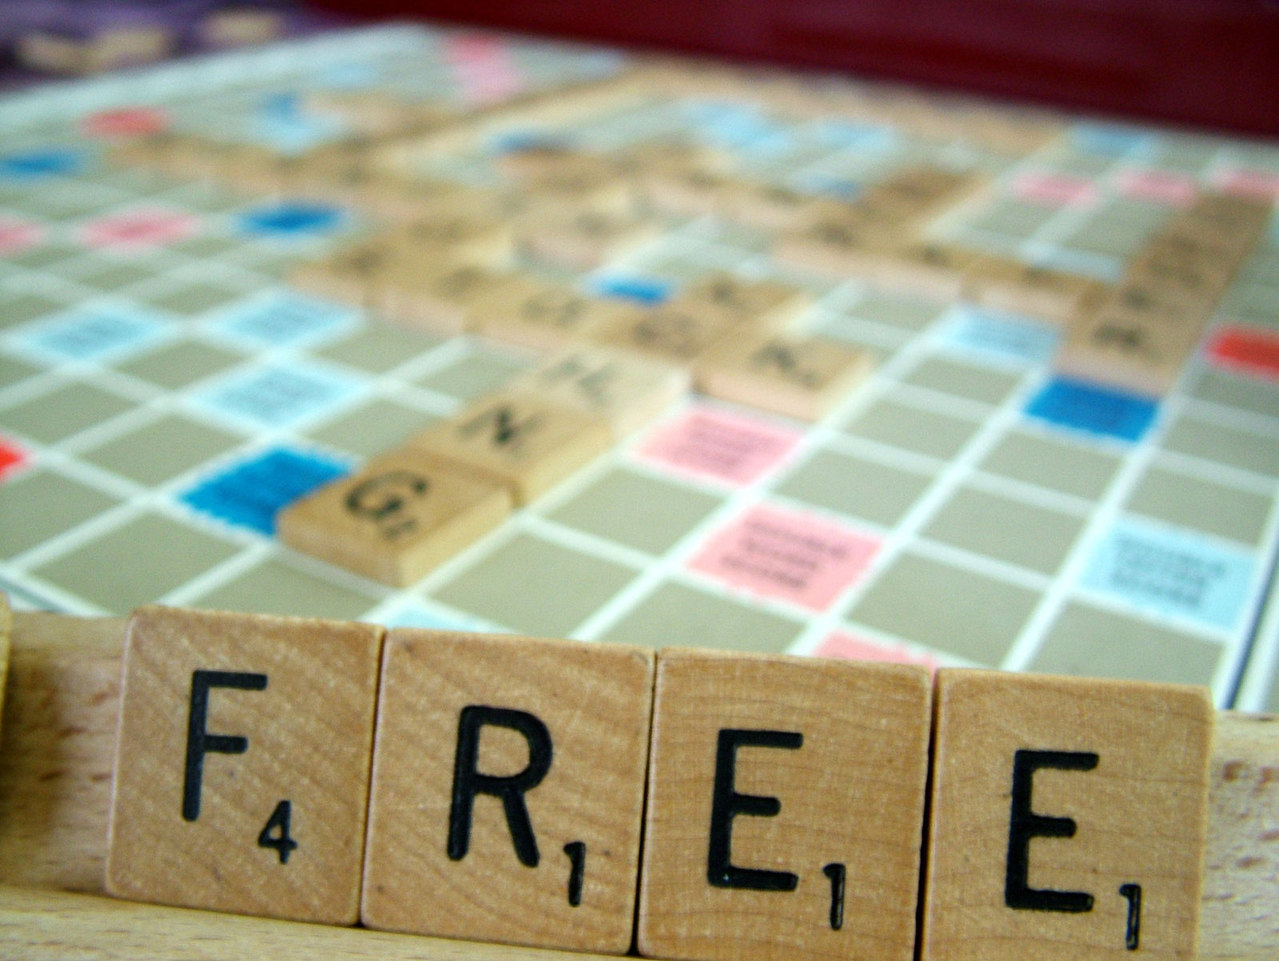 scrabble tiles spelling out the word FREE